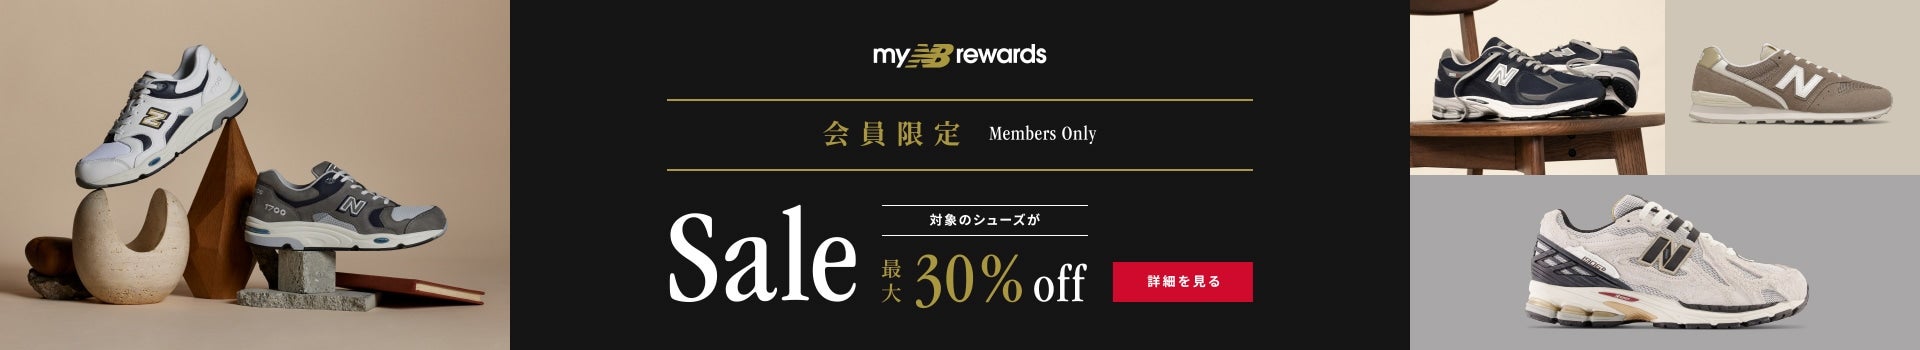 Members Only SALE